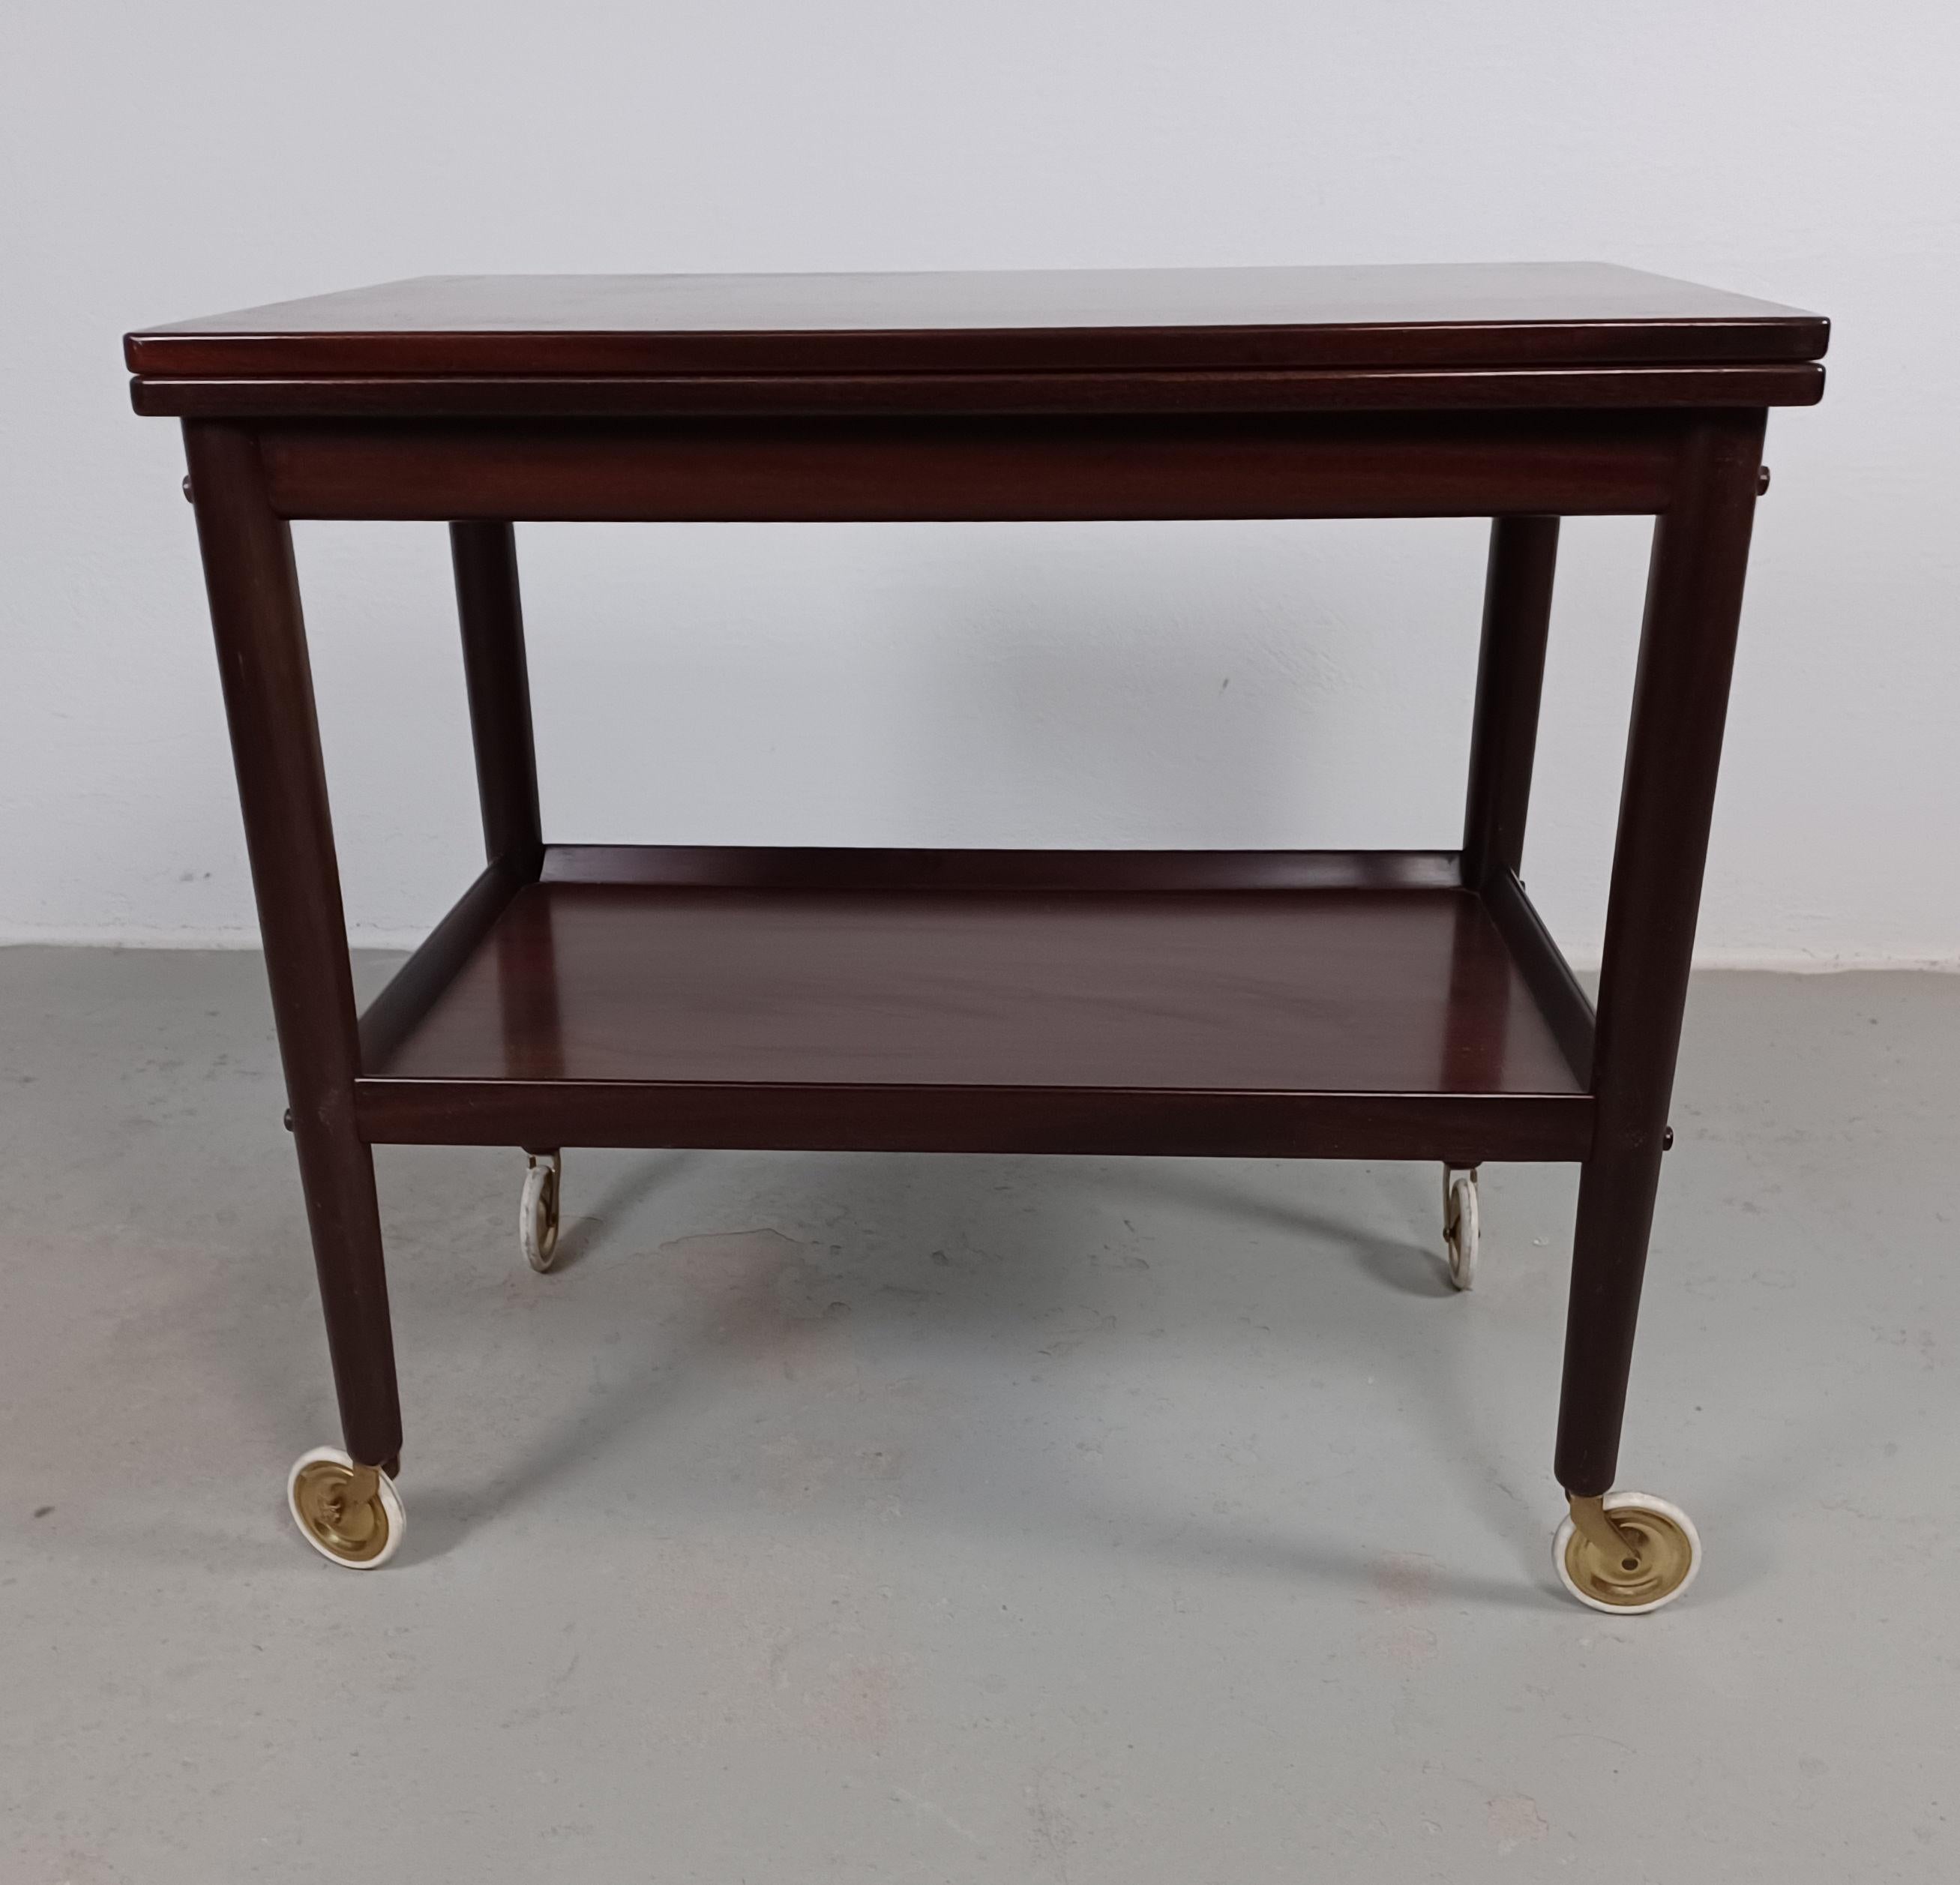 1960s Ole Wanscher restored mulitfunctional Rungstedlund mahogany side table.

The sidetable consist of a adjustable tabletop that can be turned to the side changing the table form a small serving table / side table to a bartable and opend once more